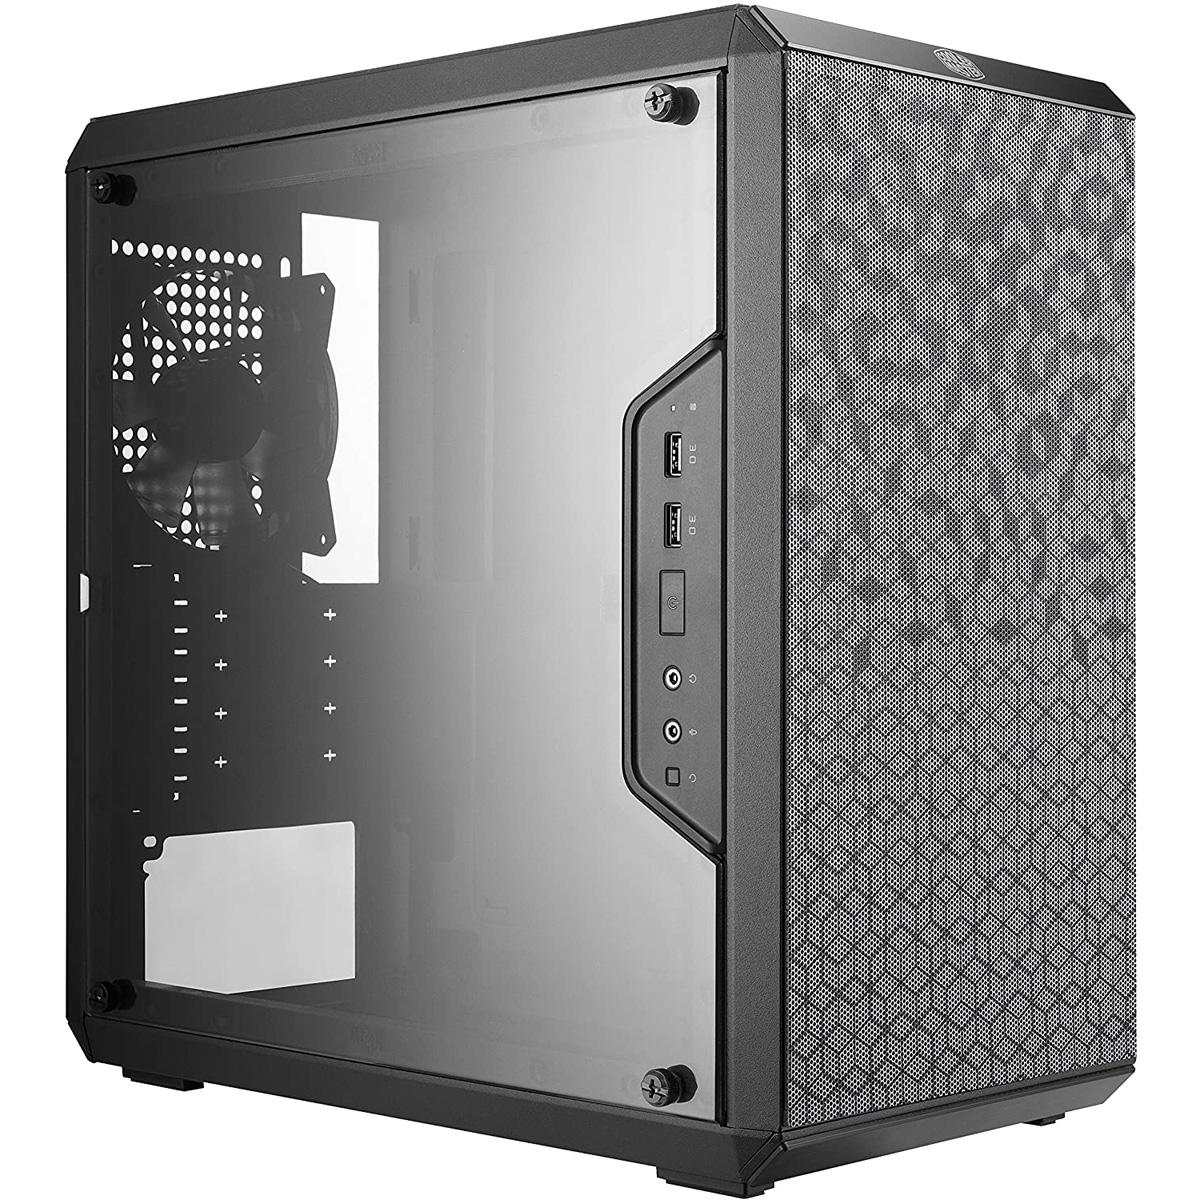 Cooler Master MasterBox Q300L MicroATX Tower for $38.69 Shipped